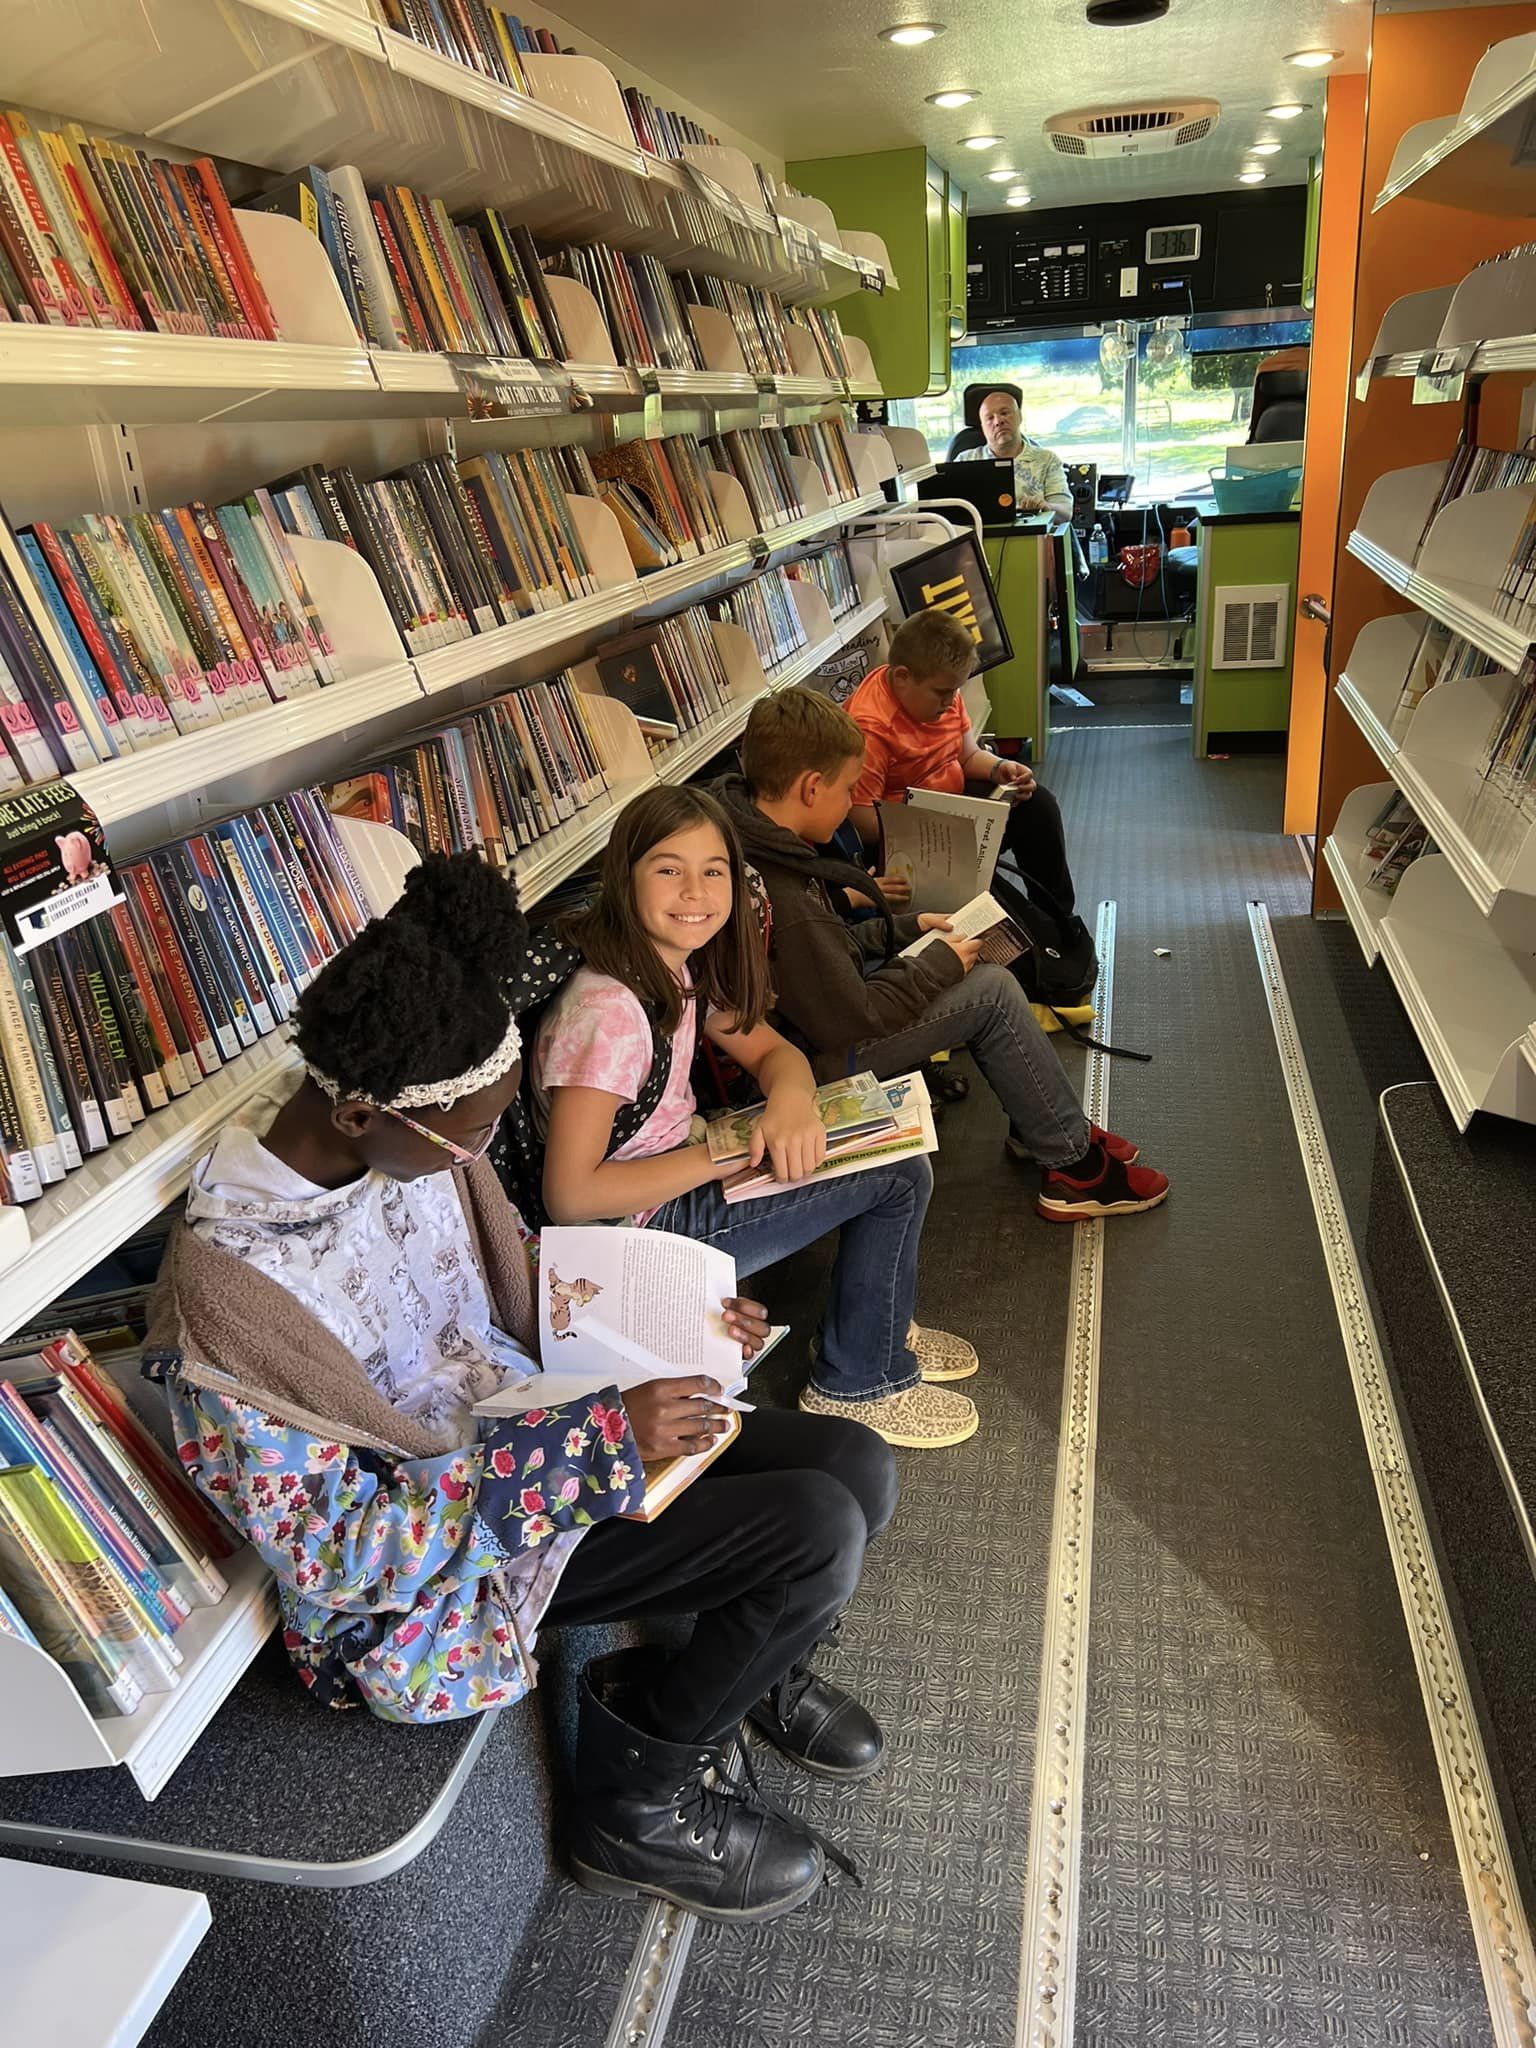 SEOLS Bookmobile is for all ages!